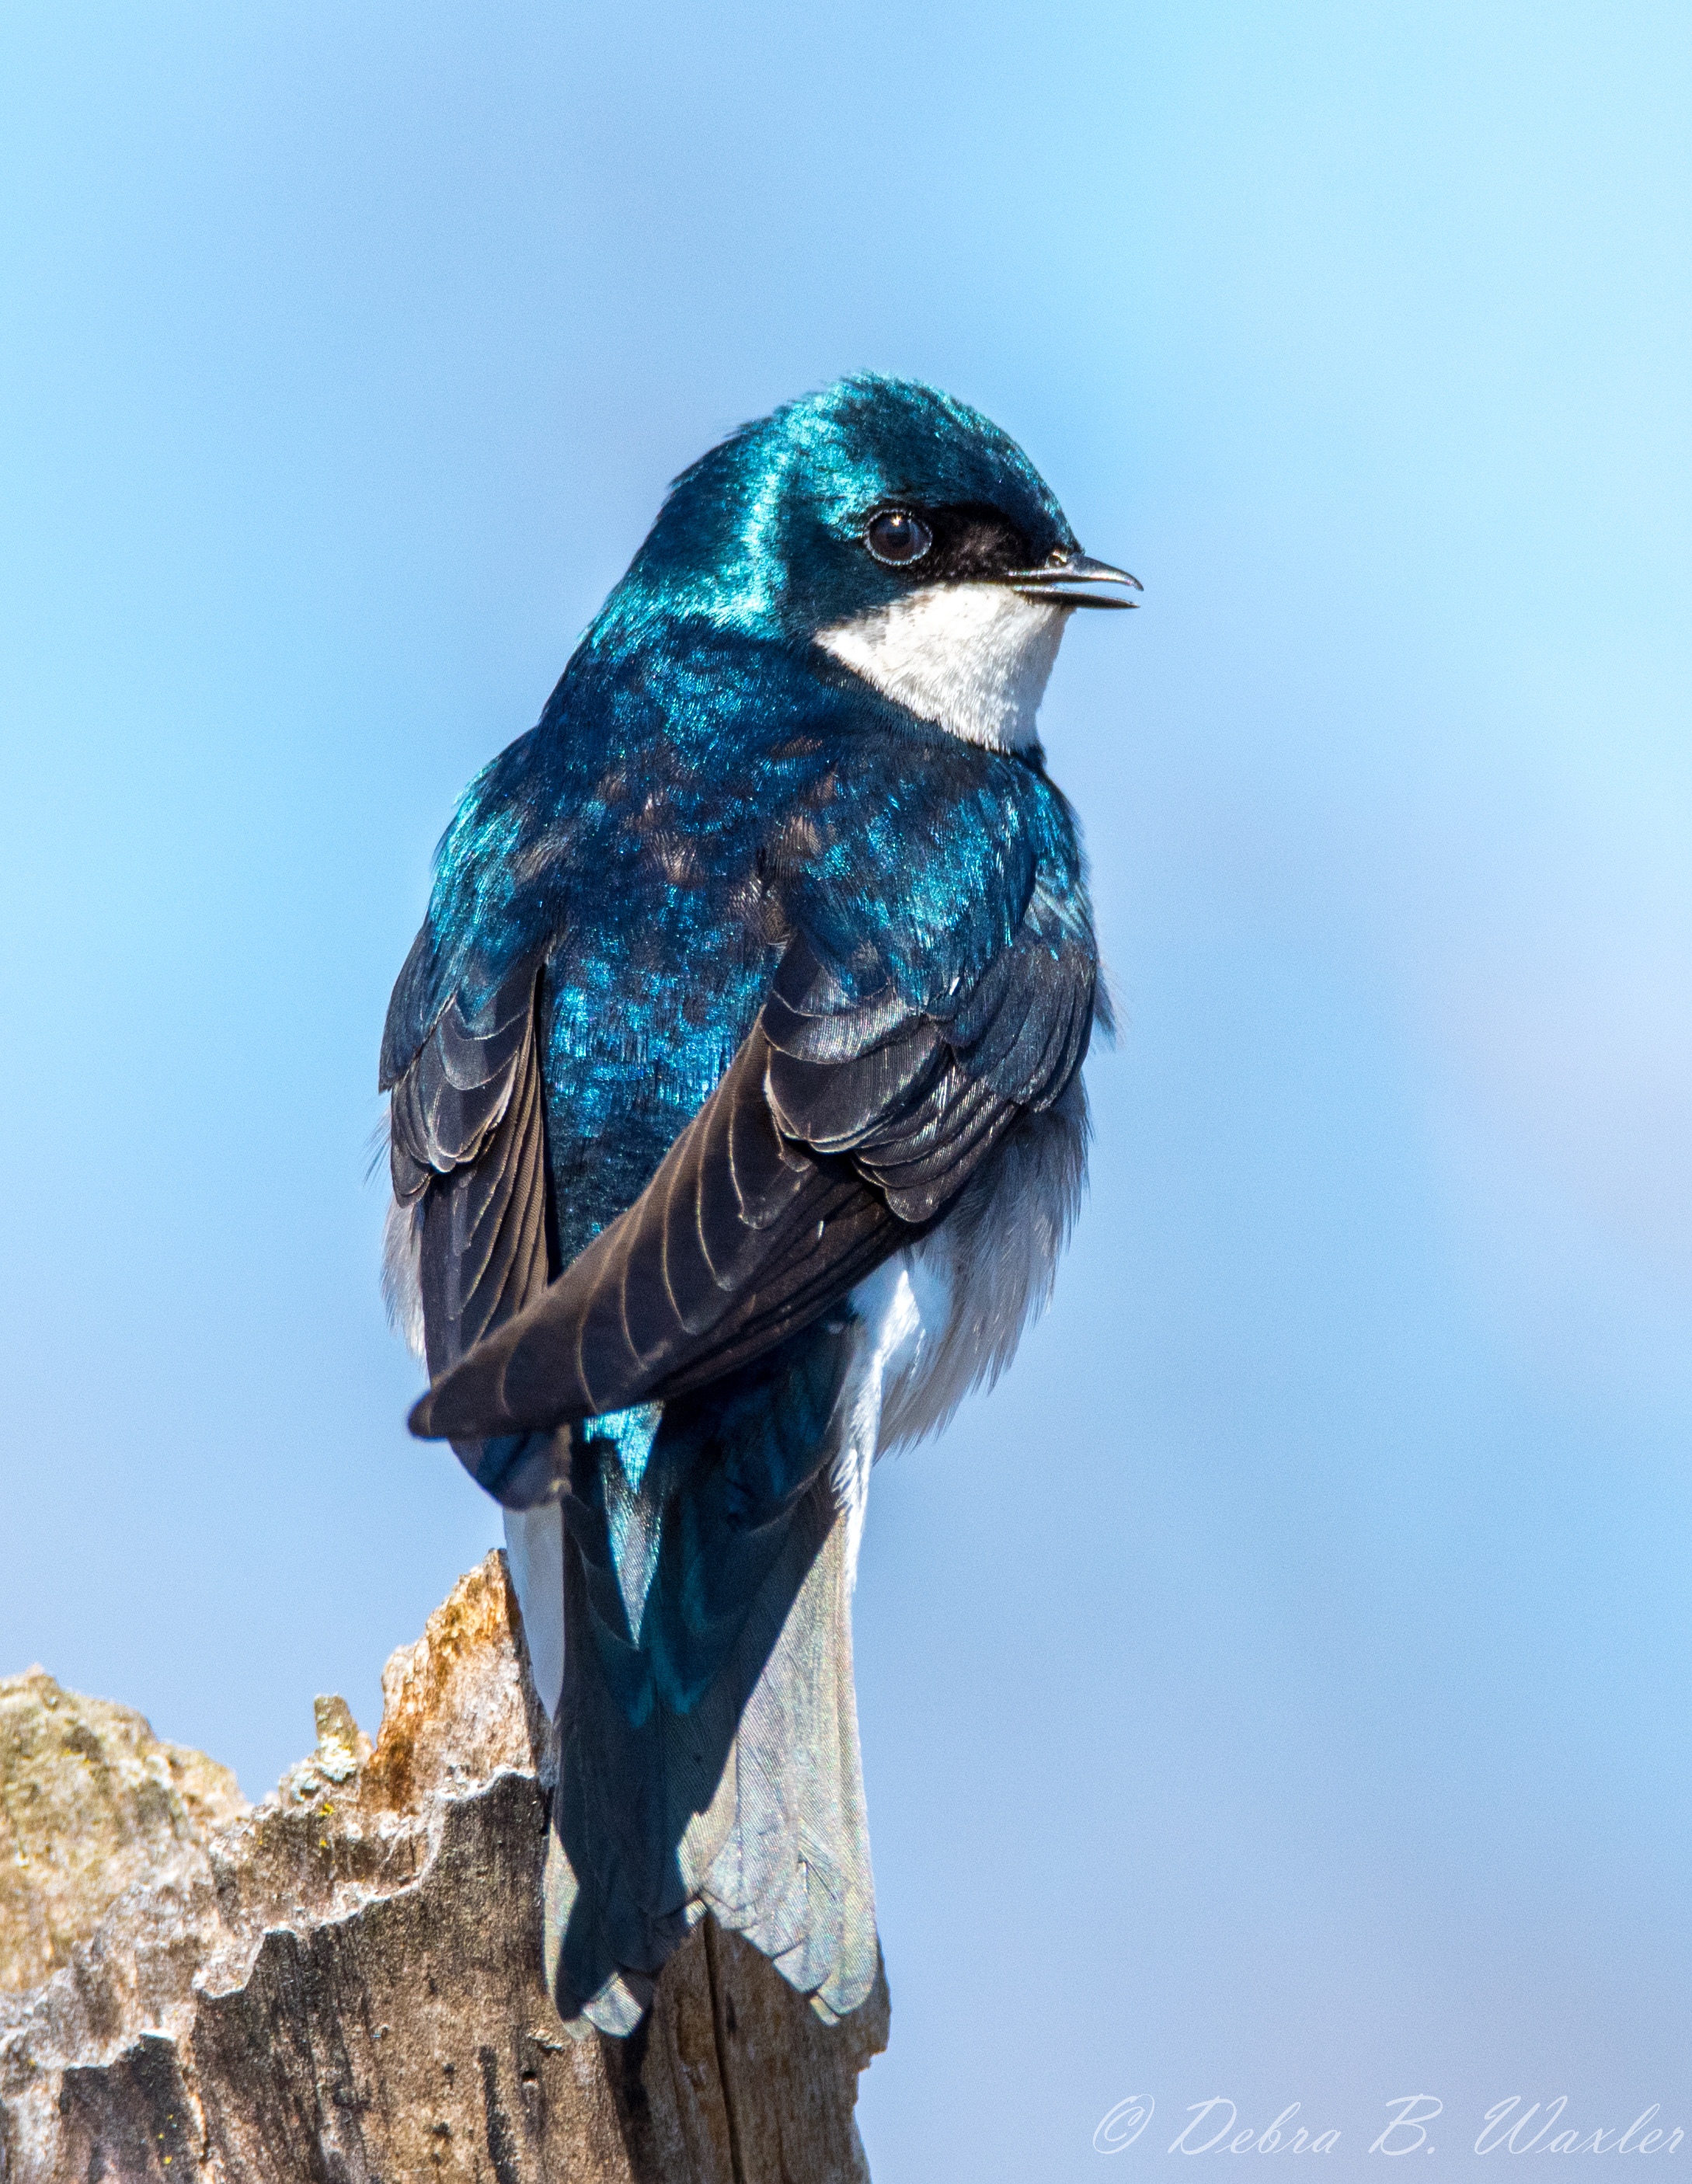 Picture of a tree swallow taken by Dr. Bangasser, who is also a talented photographer.